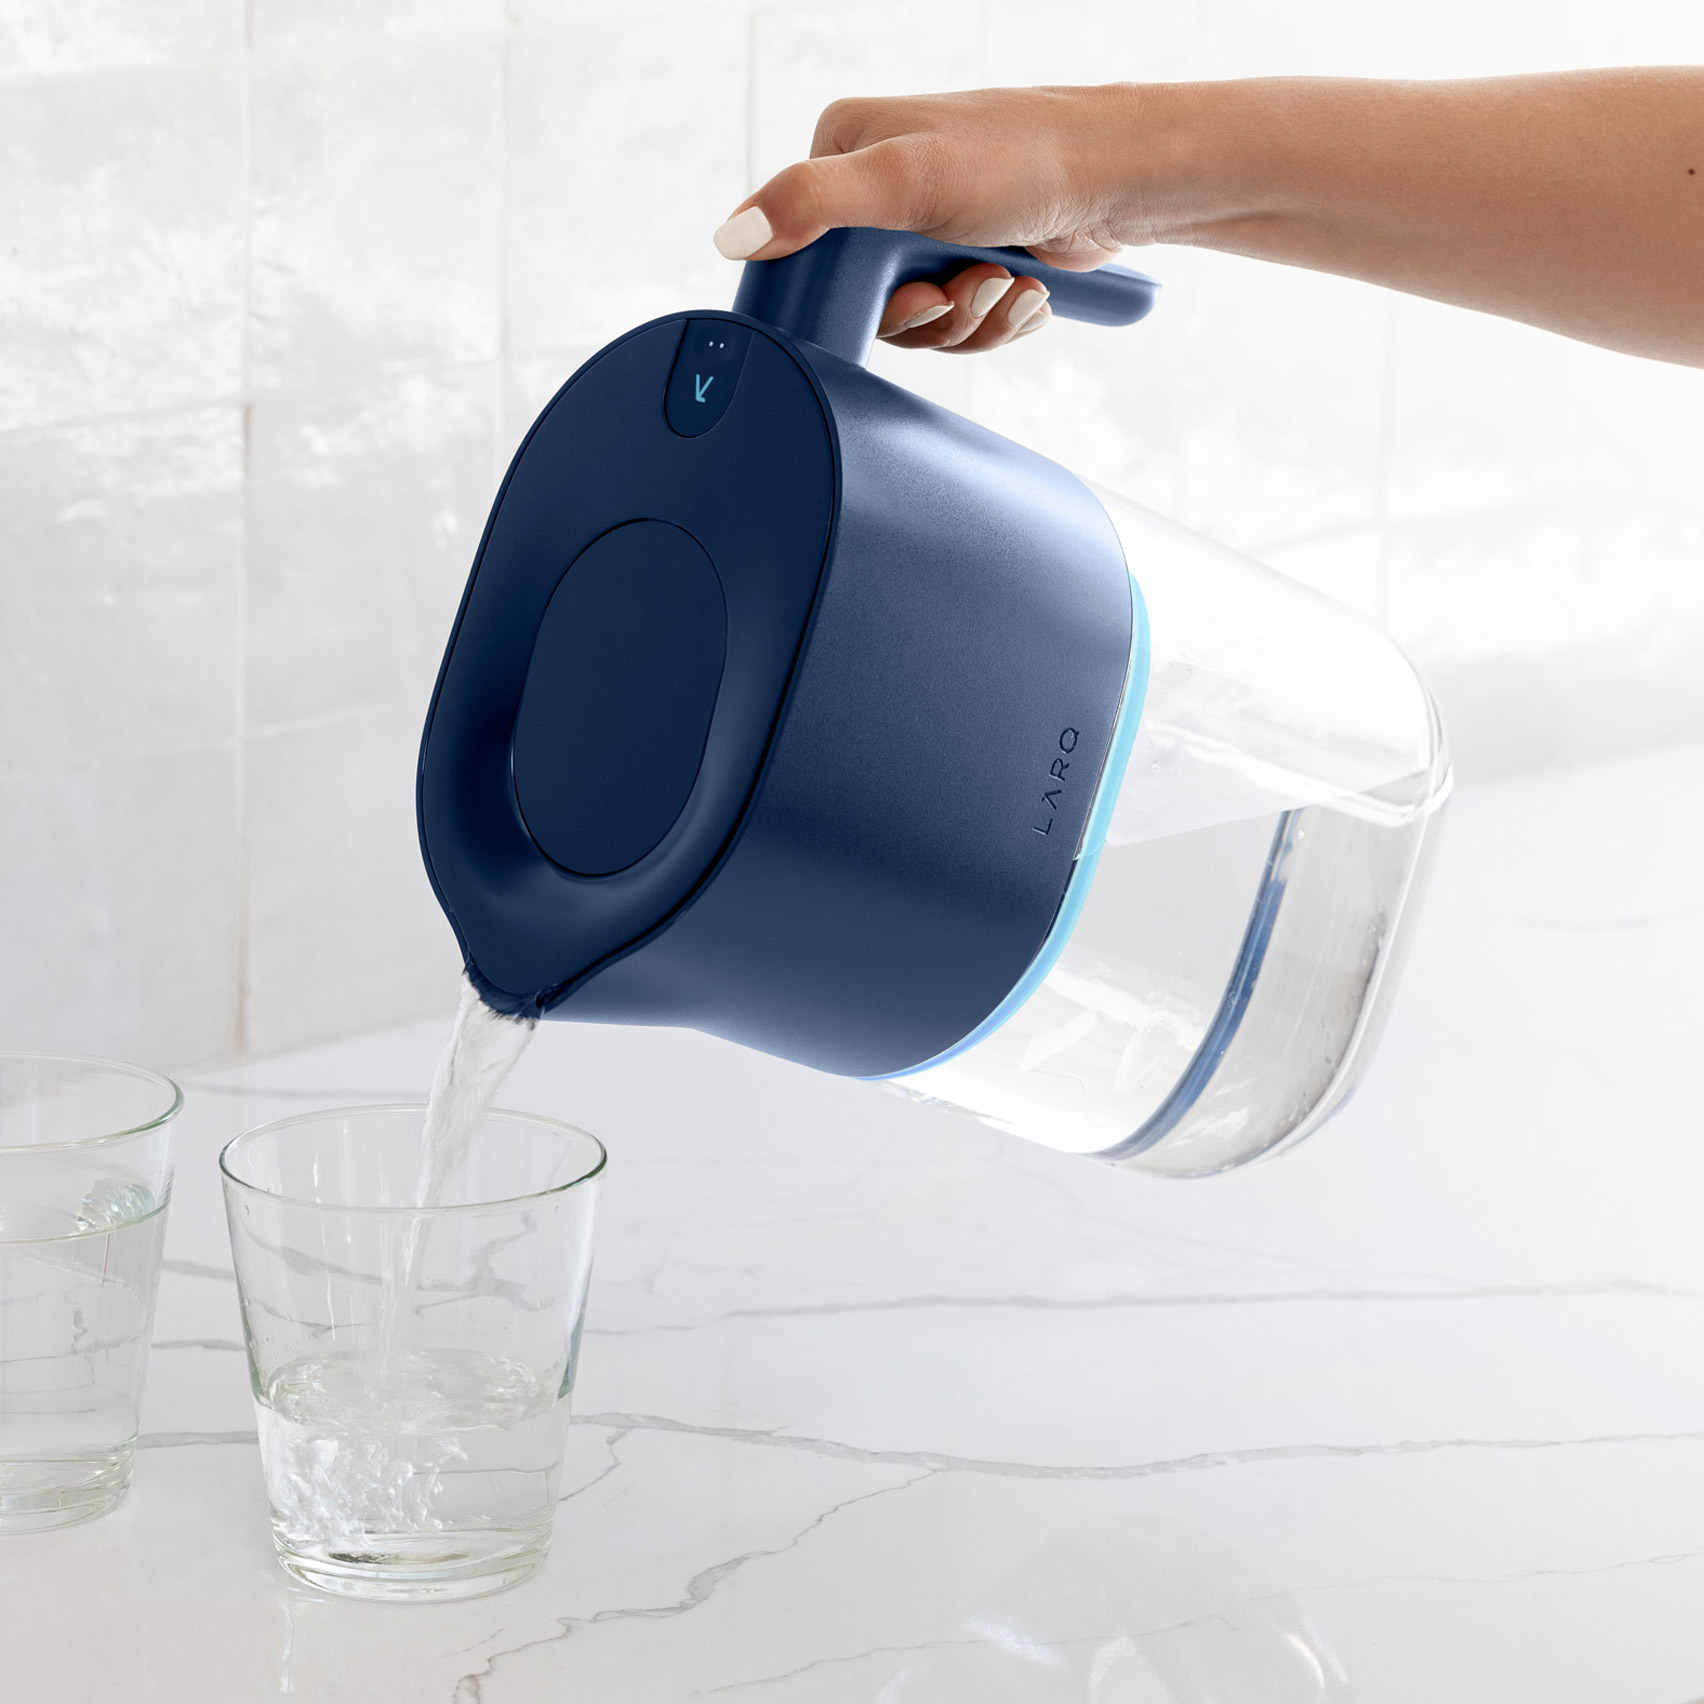 Stay Hydrated with This Sustainable Water Pitcher